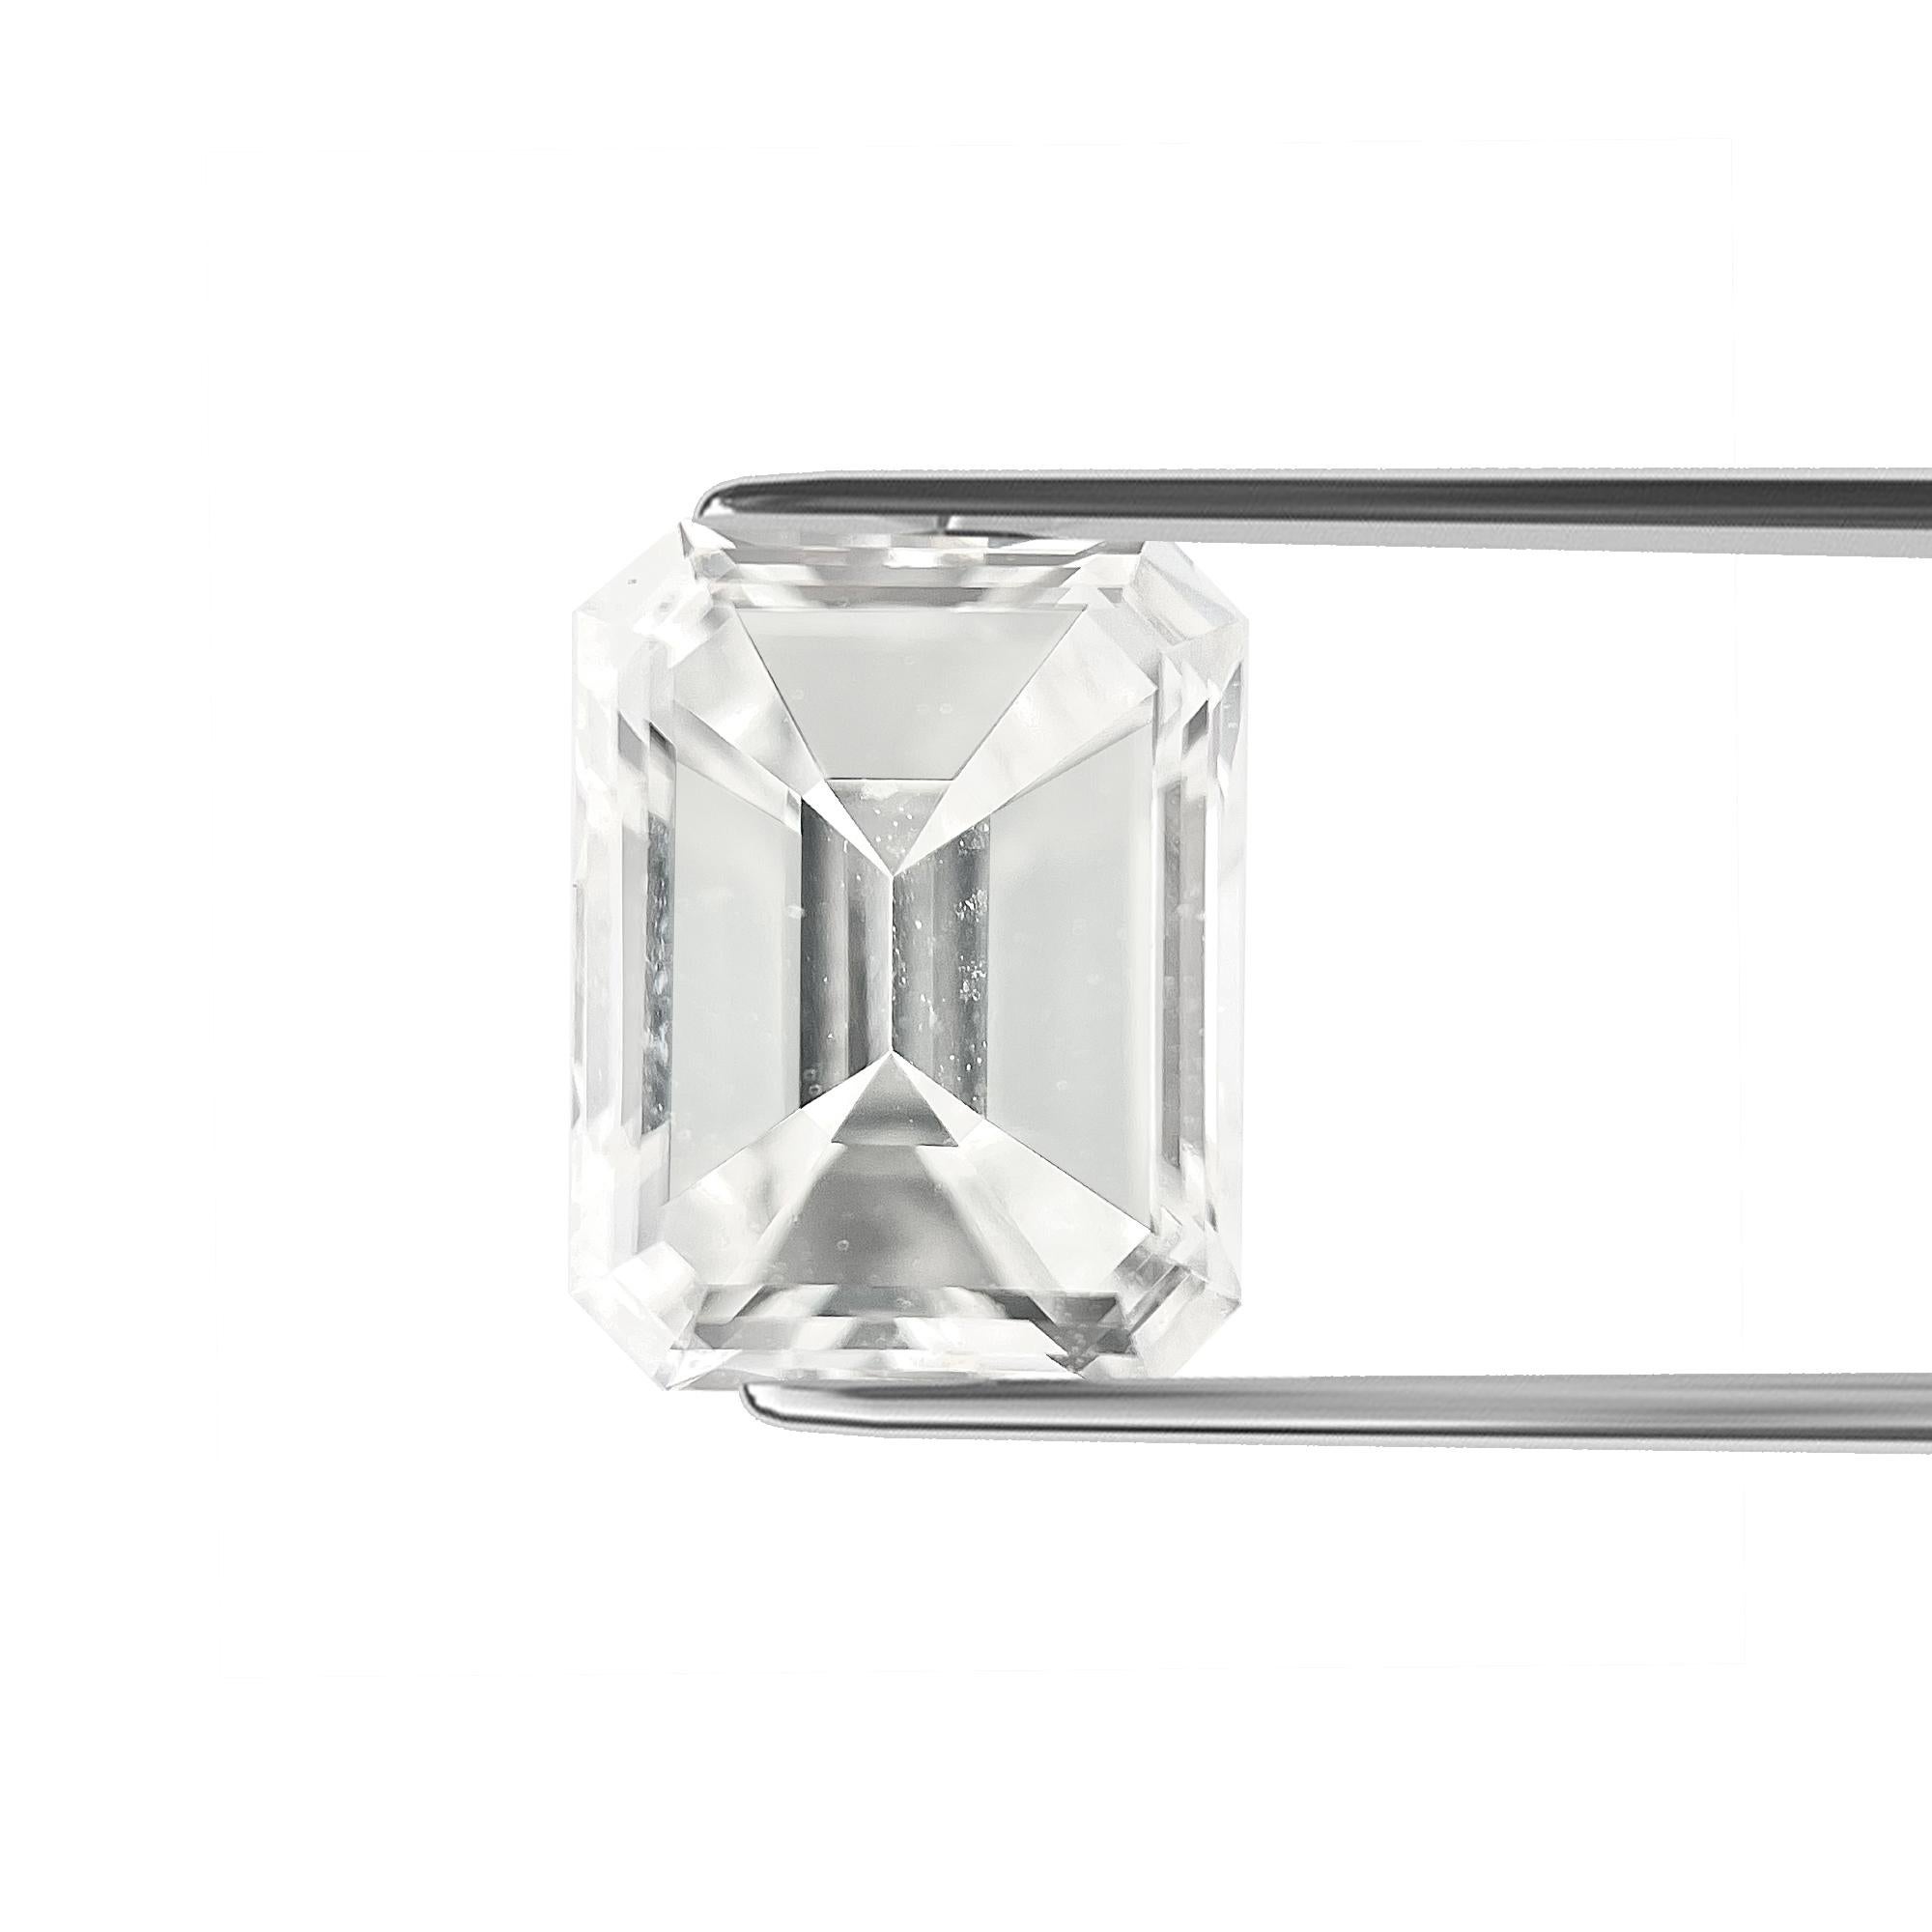 ITEM DESCRIPTION

ID #:	NY56716
Stone Shape: EMERALD CUT
Diamond Weight: 1.01ct
Clarity: VVS1
Color: H
Cut:	Excellent
Measurements: 6.69 x 5.15 x 3.40 mm
Depth %:	66%
Table %:	74%
Symmetry: Good
Polish: Very Good
Fluorescence: None
Certifying